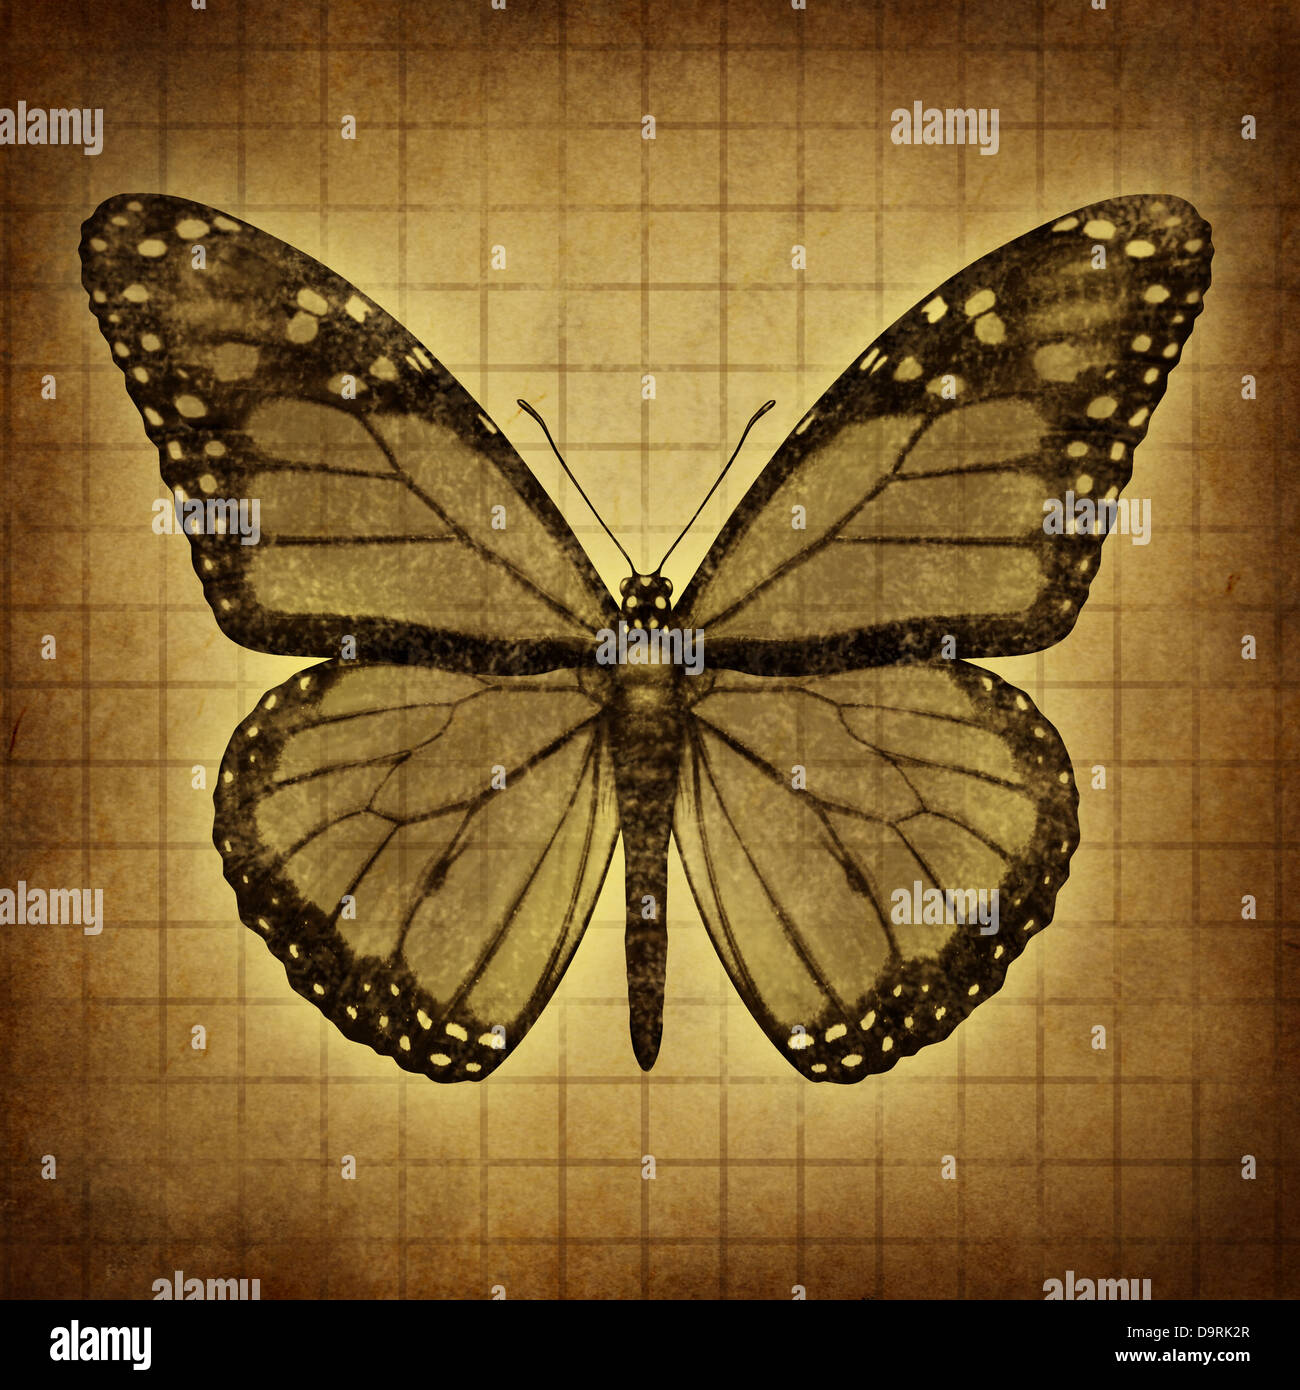 Monarch Butterfly on an old grunge texture parchment paper with open wings in a top view as migratory insect butterflies for entomology education and nature conservation. Stock Photo